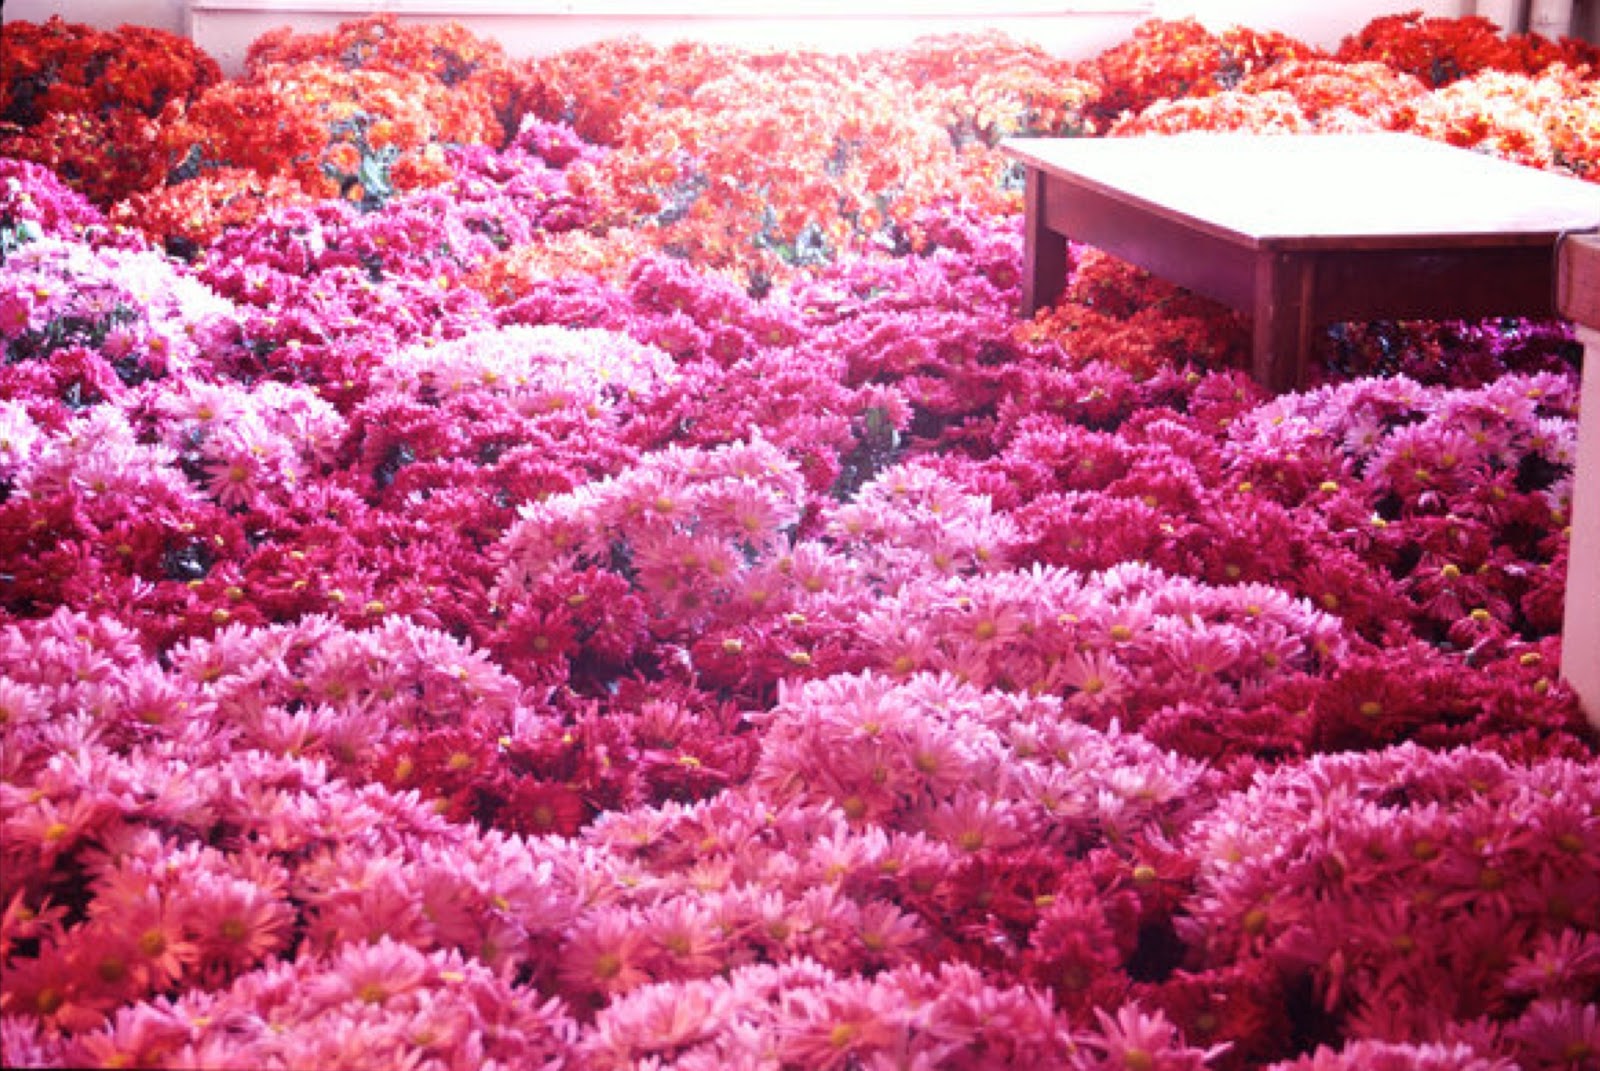 an office at the center, with a single wooden desk buried knee-deep in bright pink mums, in mounds and bunches all over the floor.